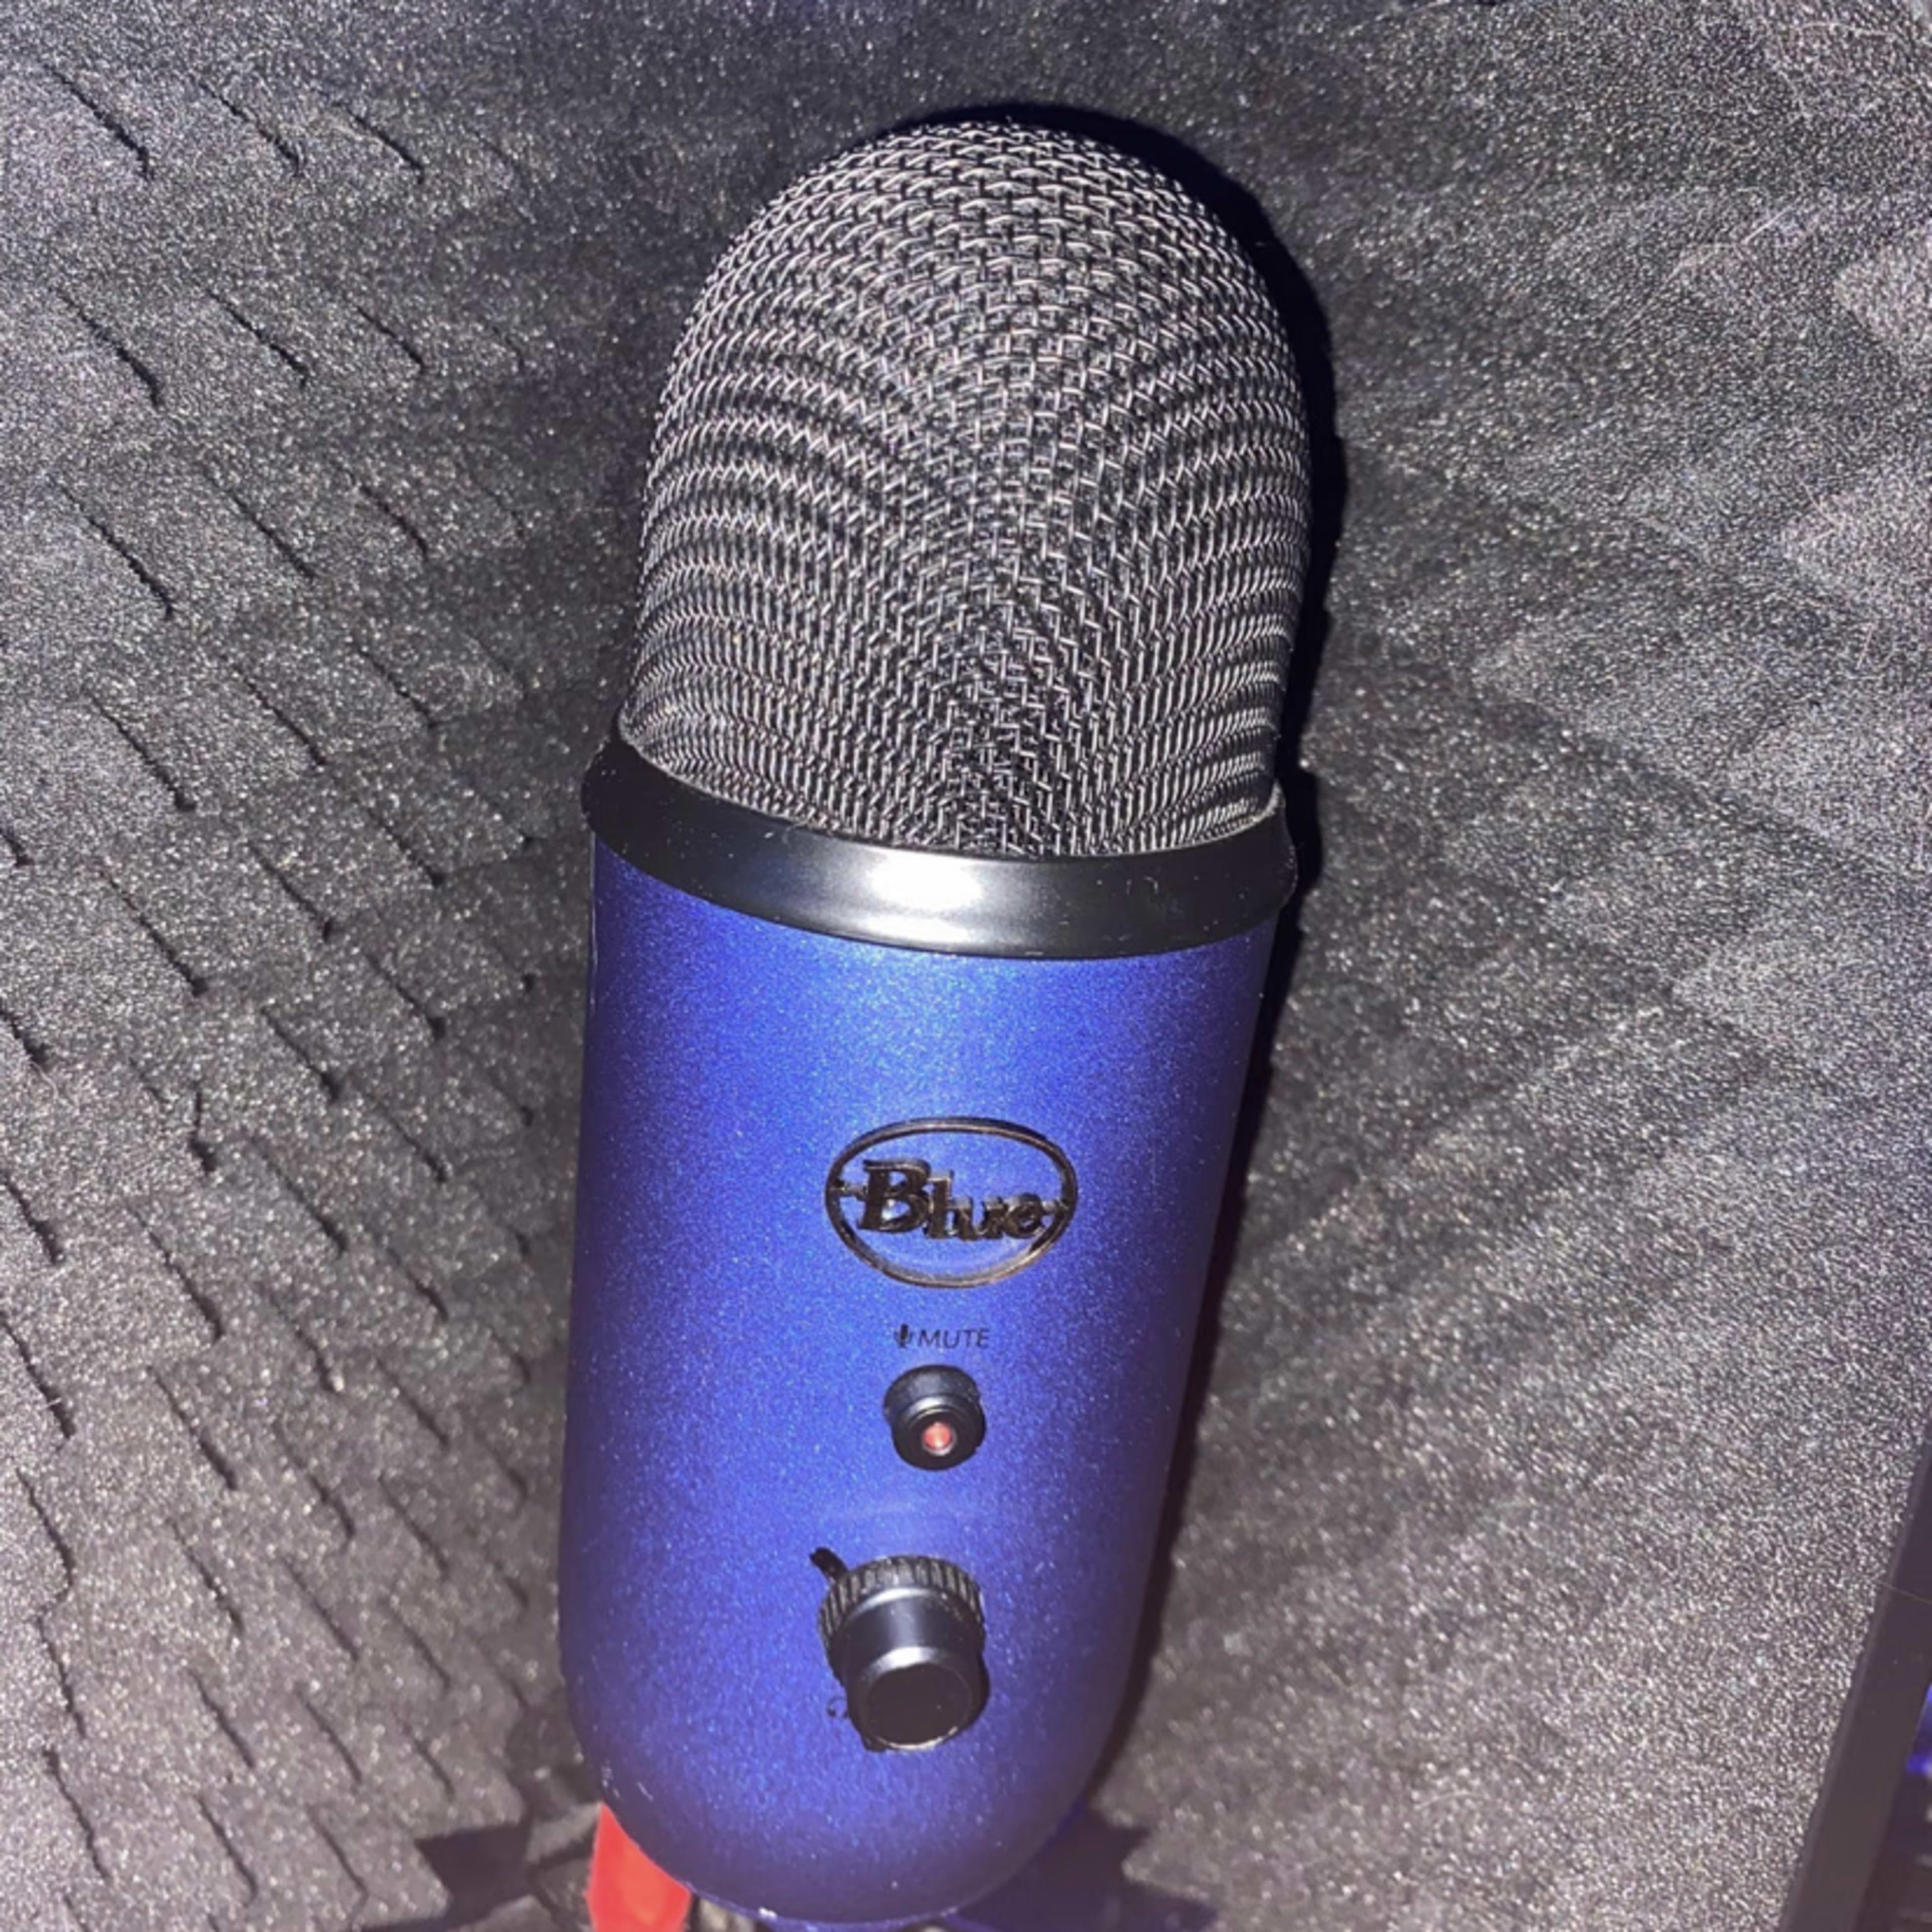 Blue Yeti Microphone - Complete Setup for Gaming/Music/Podcast